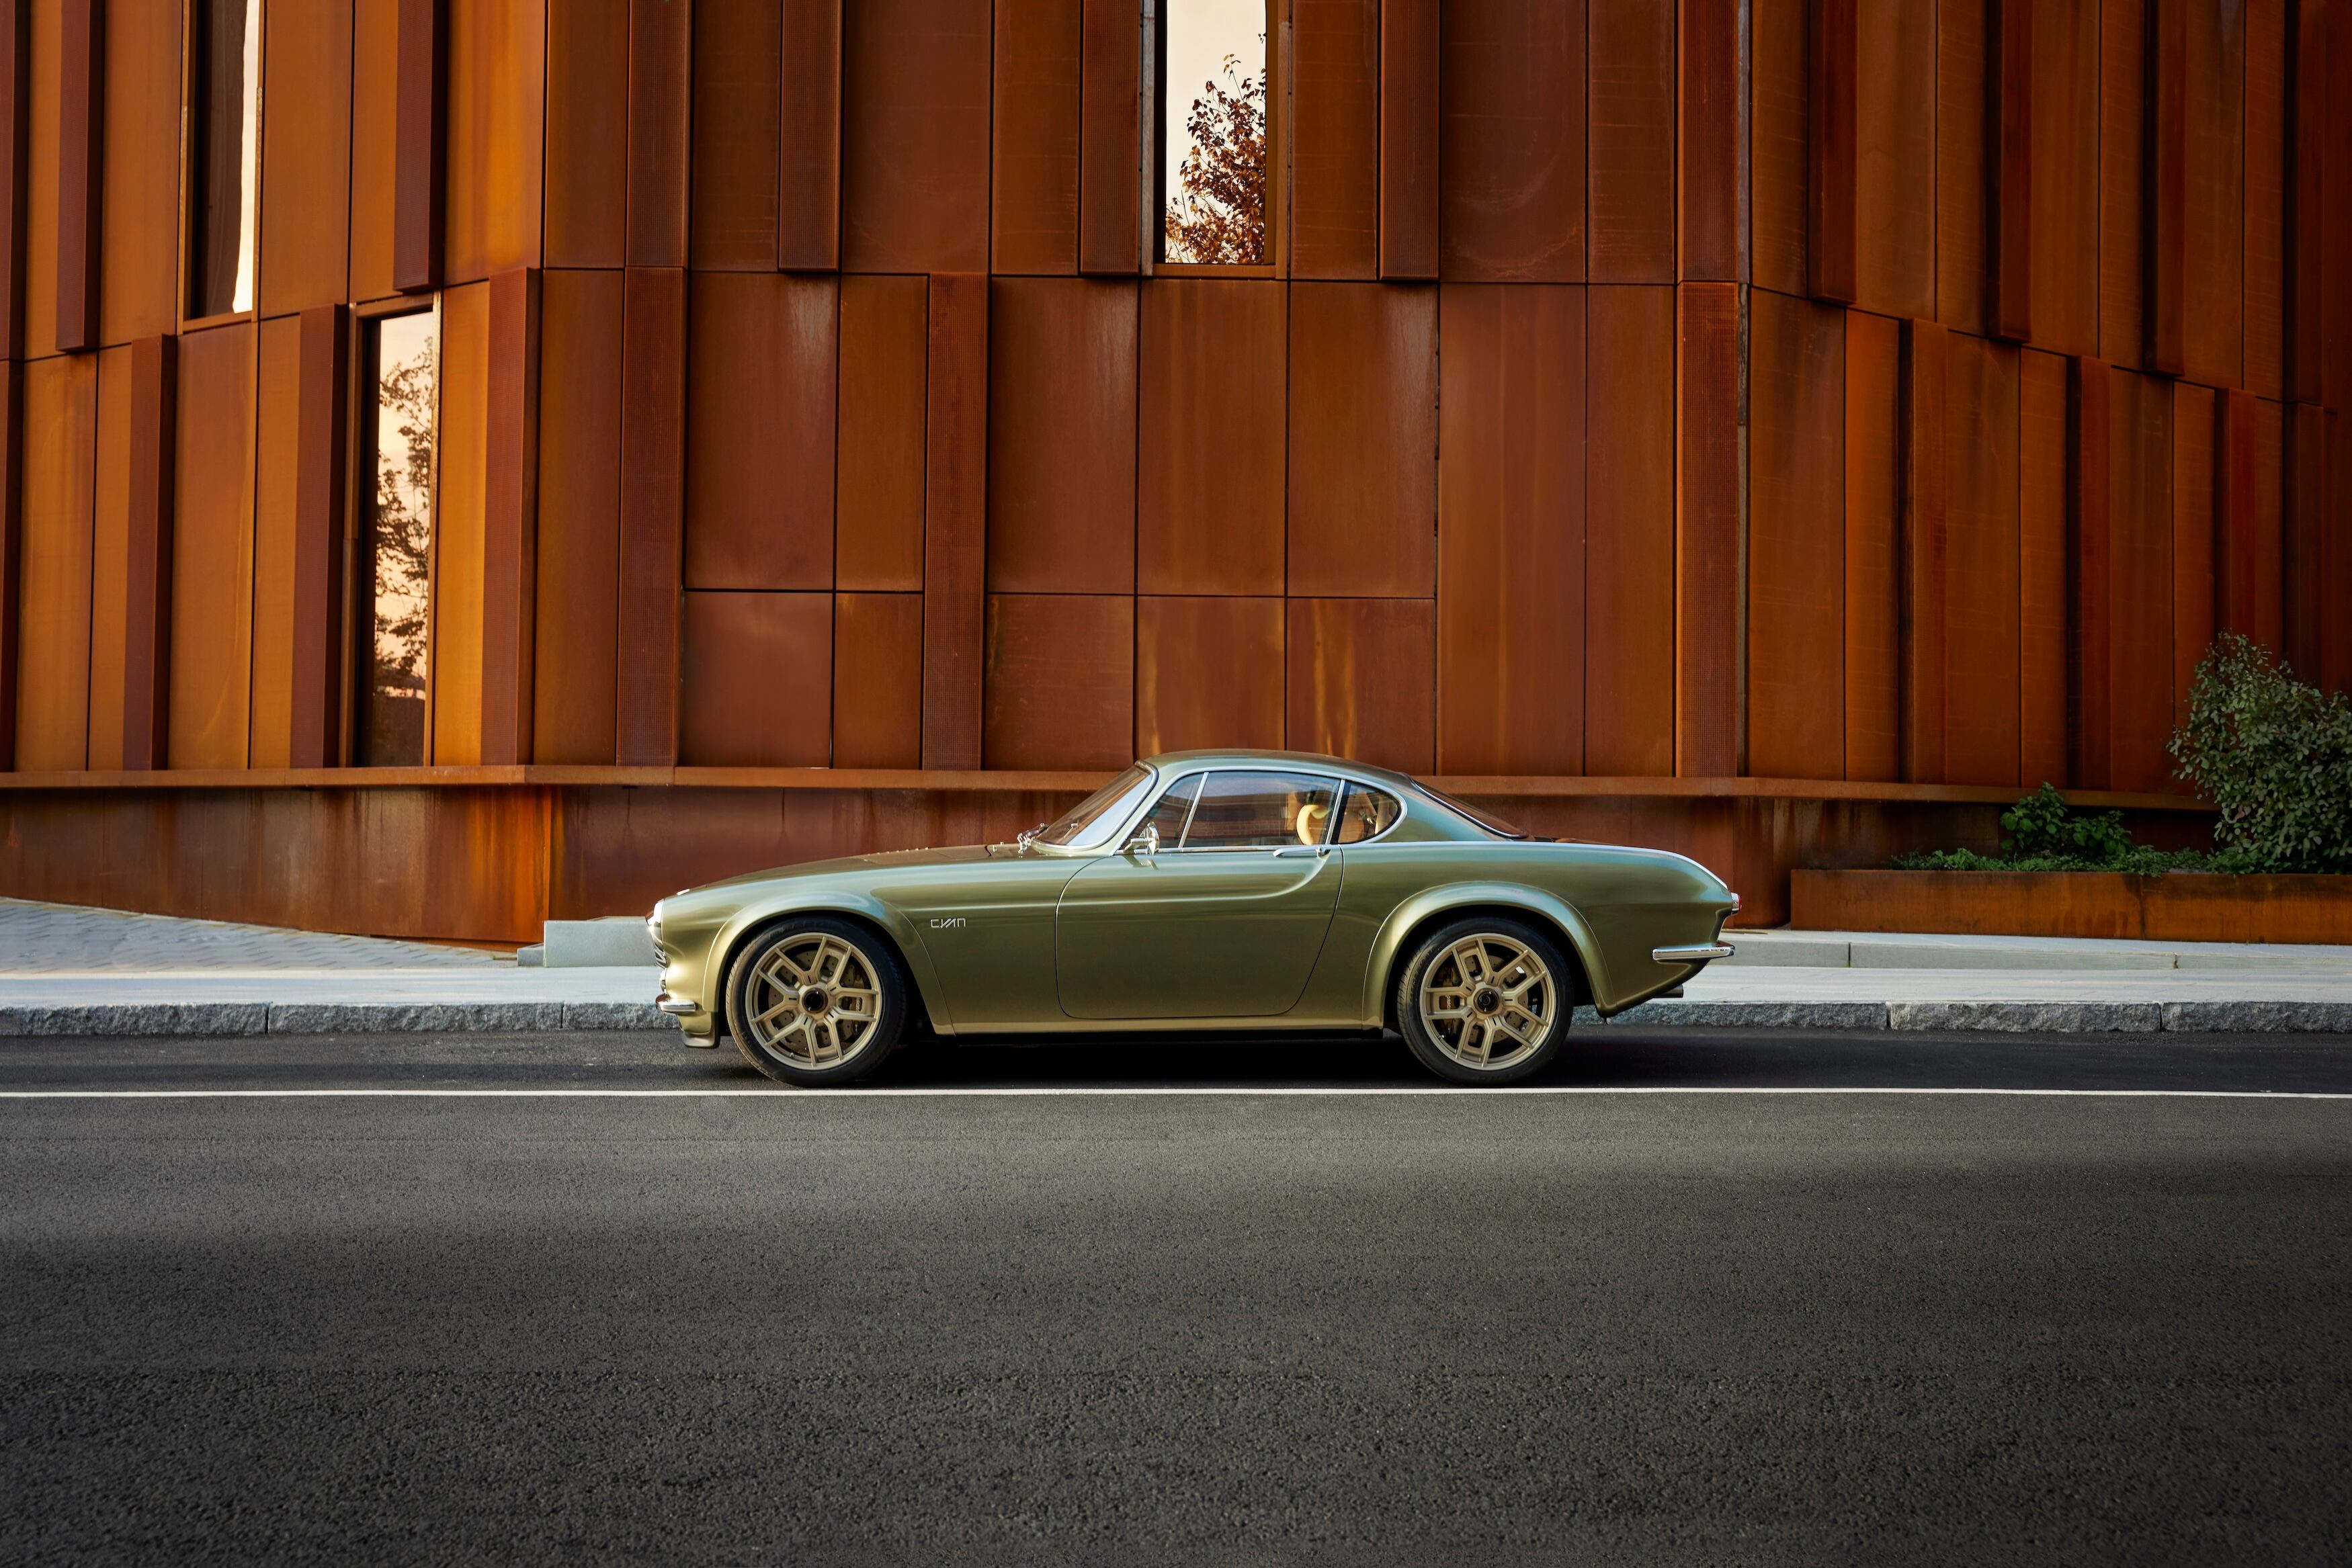 The Volvo P1800 highlights just how right the design of the 1960s original was, and how elegance of this sort endures